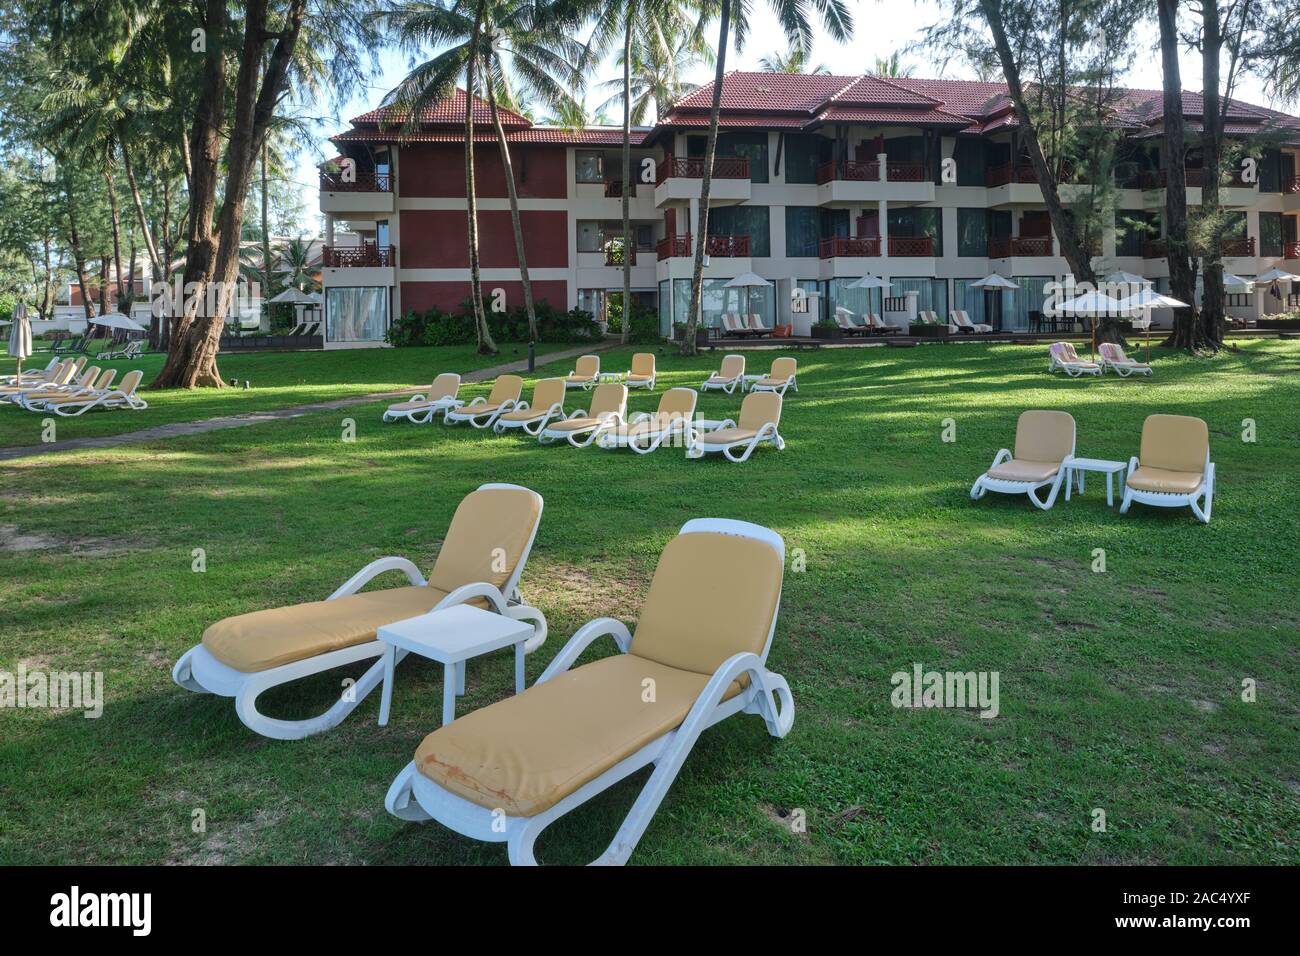 On an early morning, empty sun loungers in the grounds of Dusit Laguna Hotel at Bang Tao Beach, Phuket, Thailand, await occupants Stock Photo